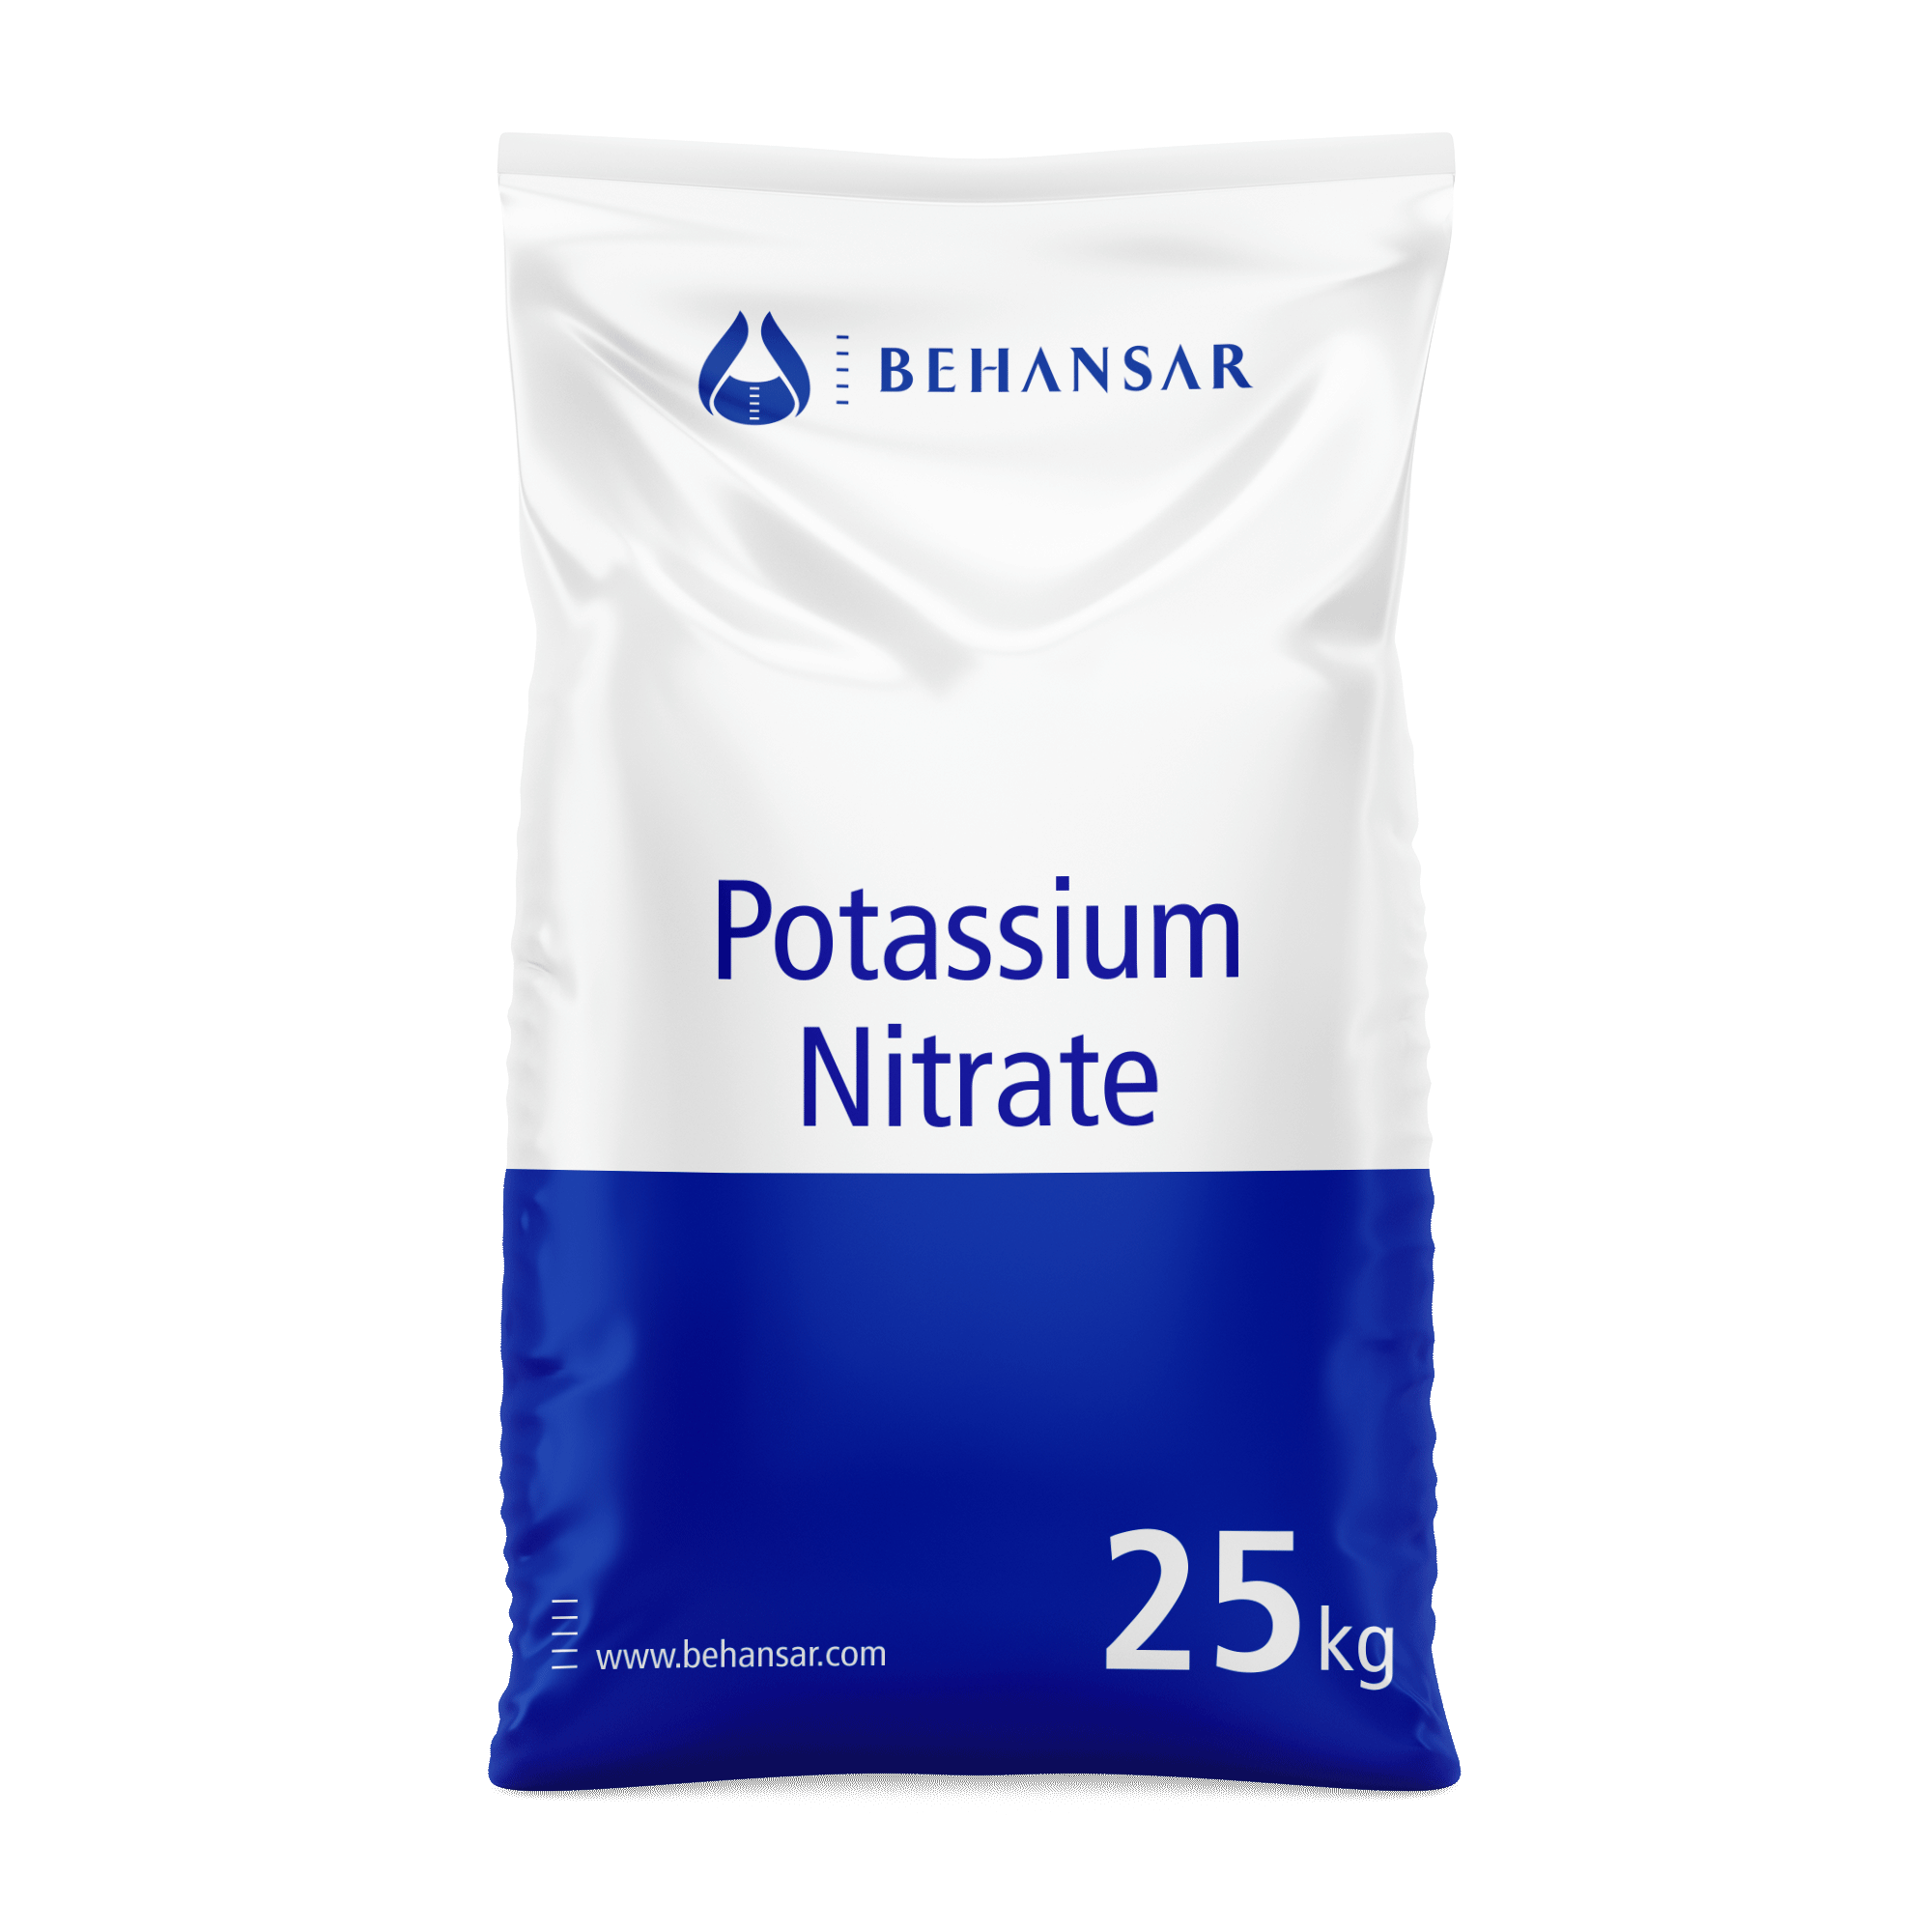 Potassium Nitrate is one of the products of Behansar Co